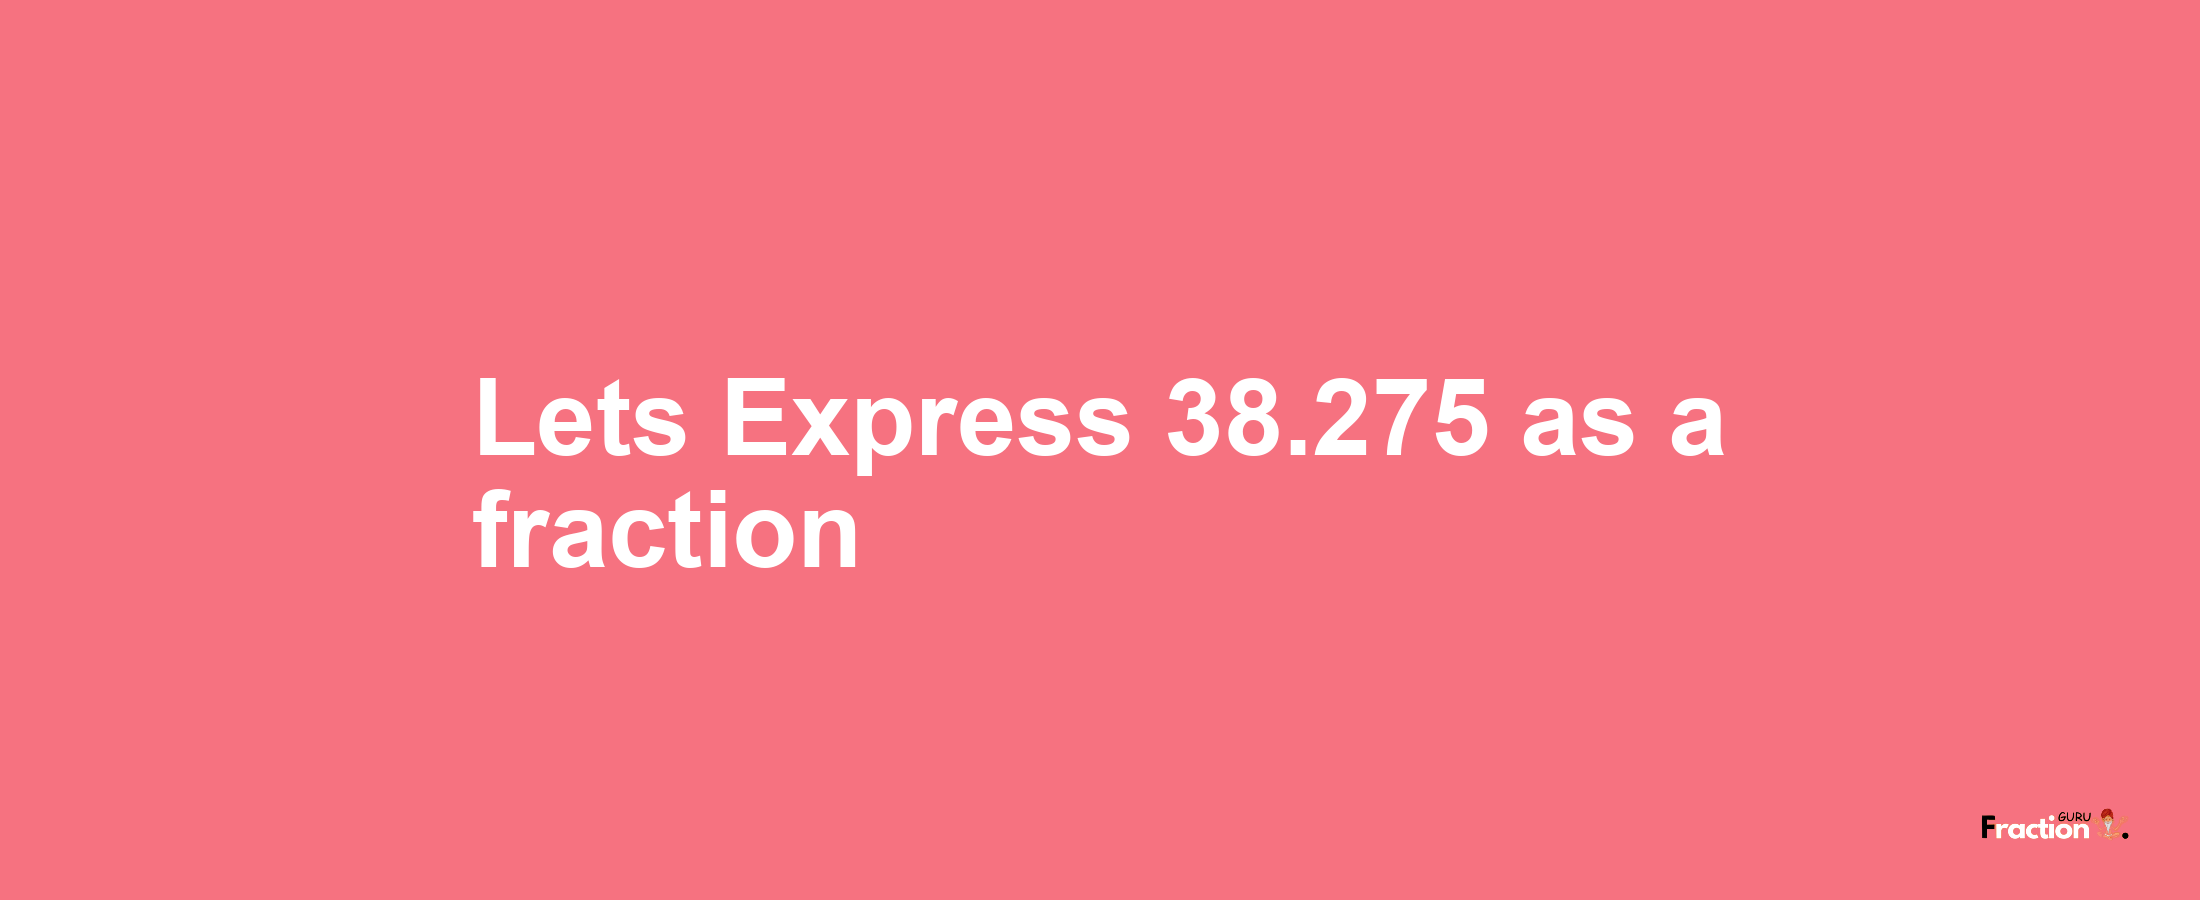 Lets Express 38.275 as afraction